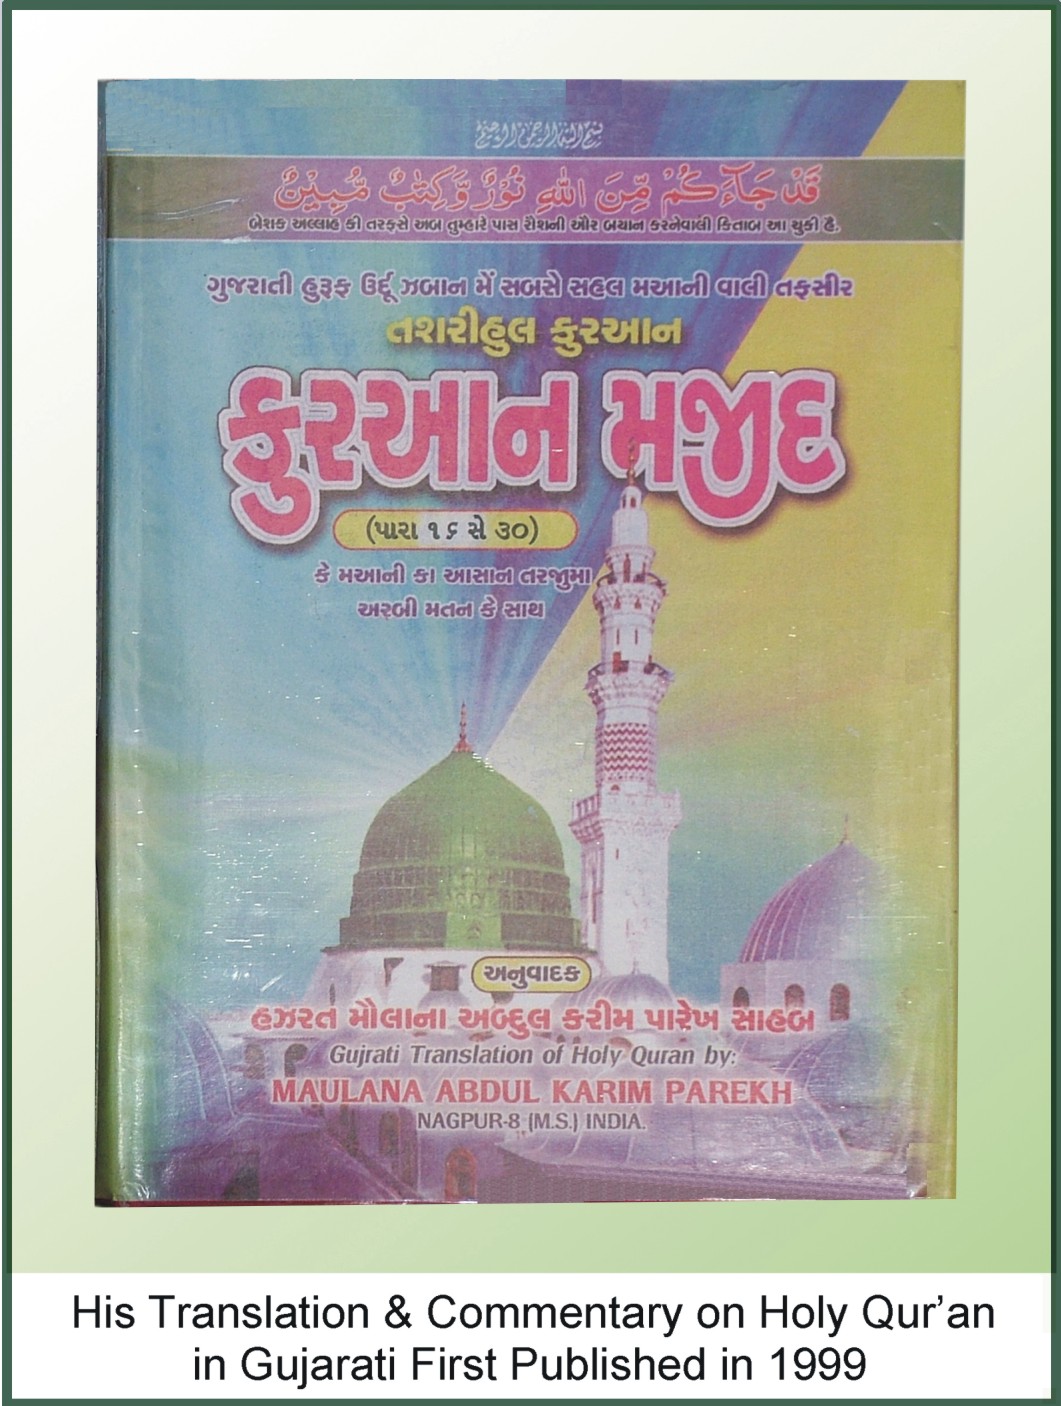 Translation & Commentary of The Holy Qur'an (Gujarati) First Published in 1999